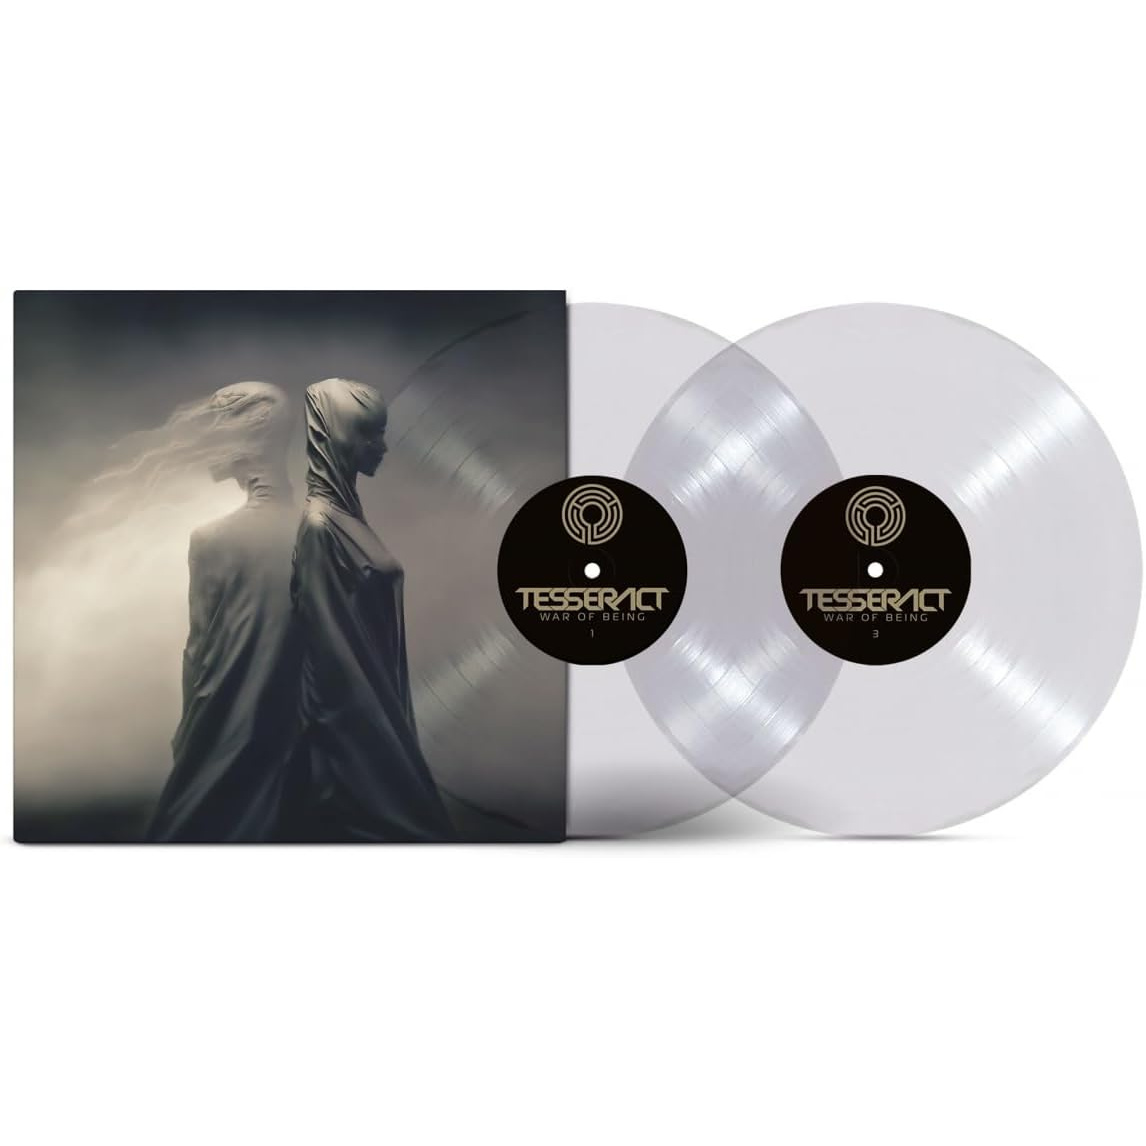 WAR OF BEING - CLEAR VINYL EDITION